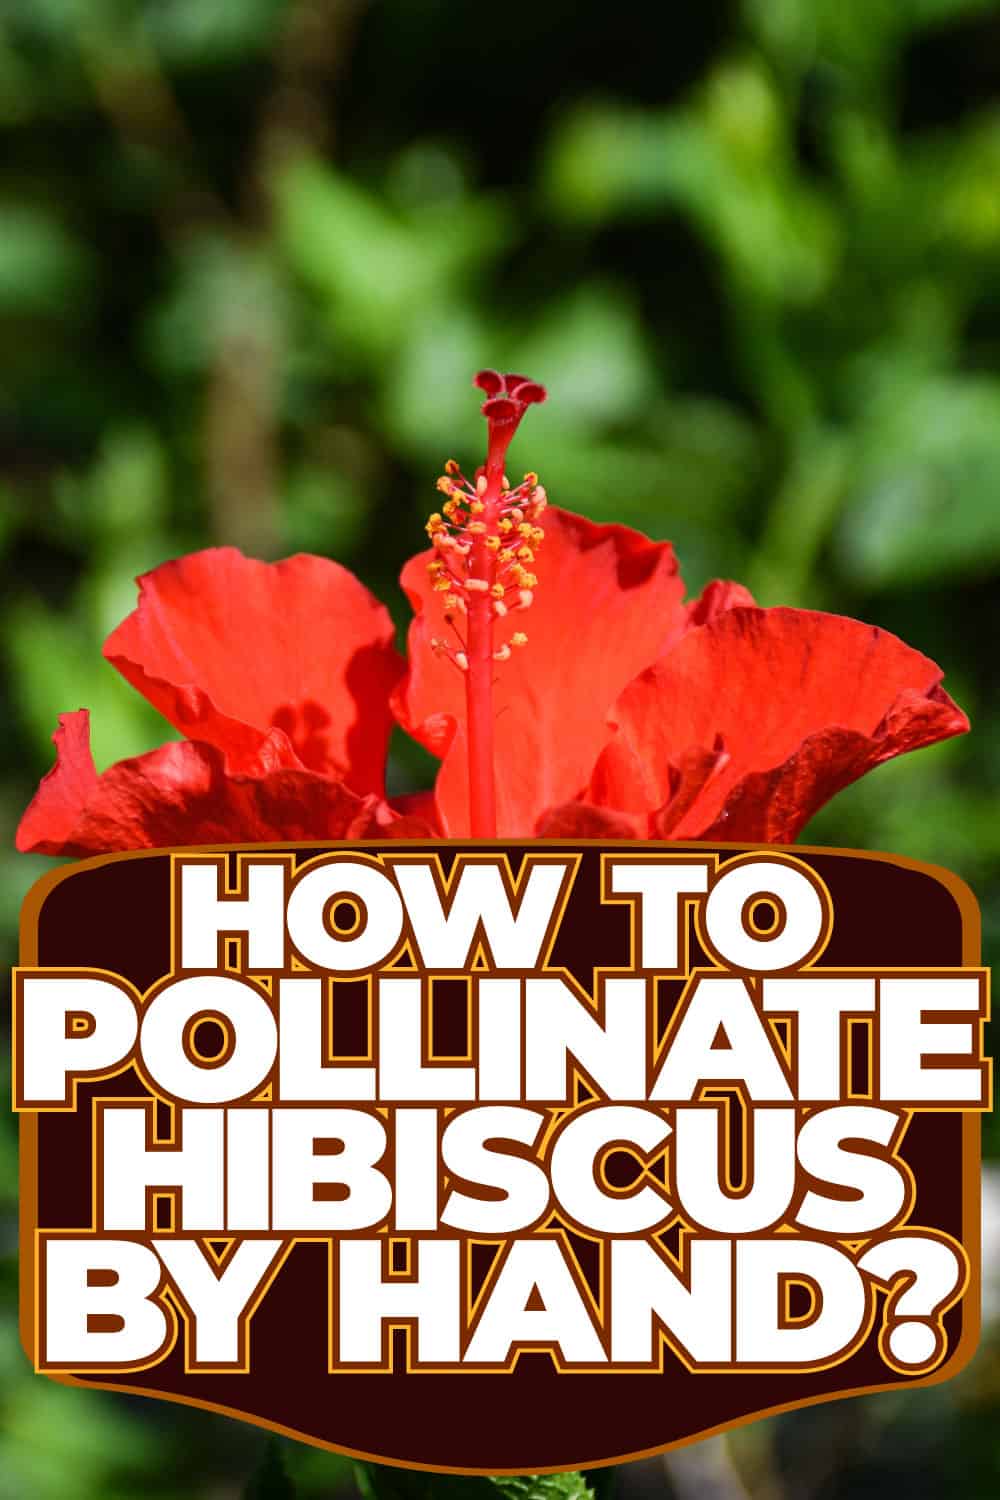 How To Pollinate Hibiscus By Hand?